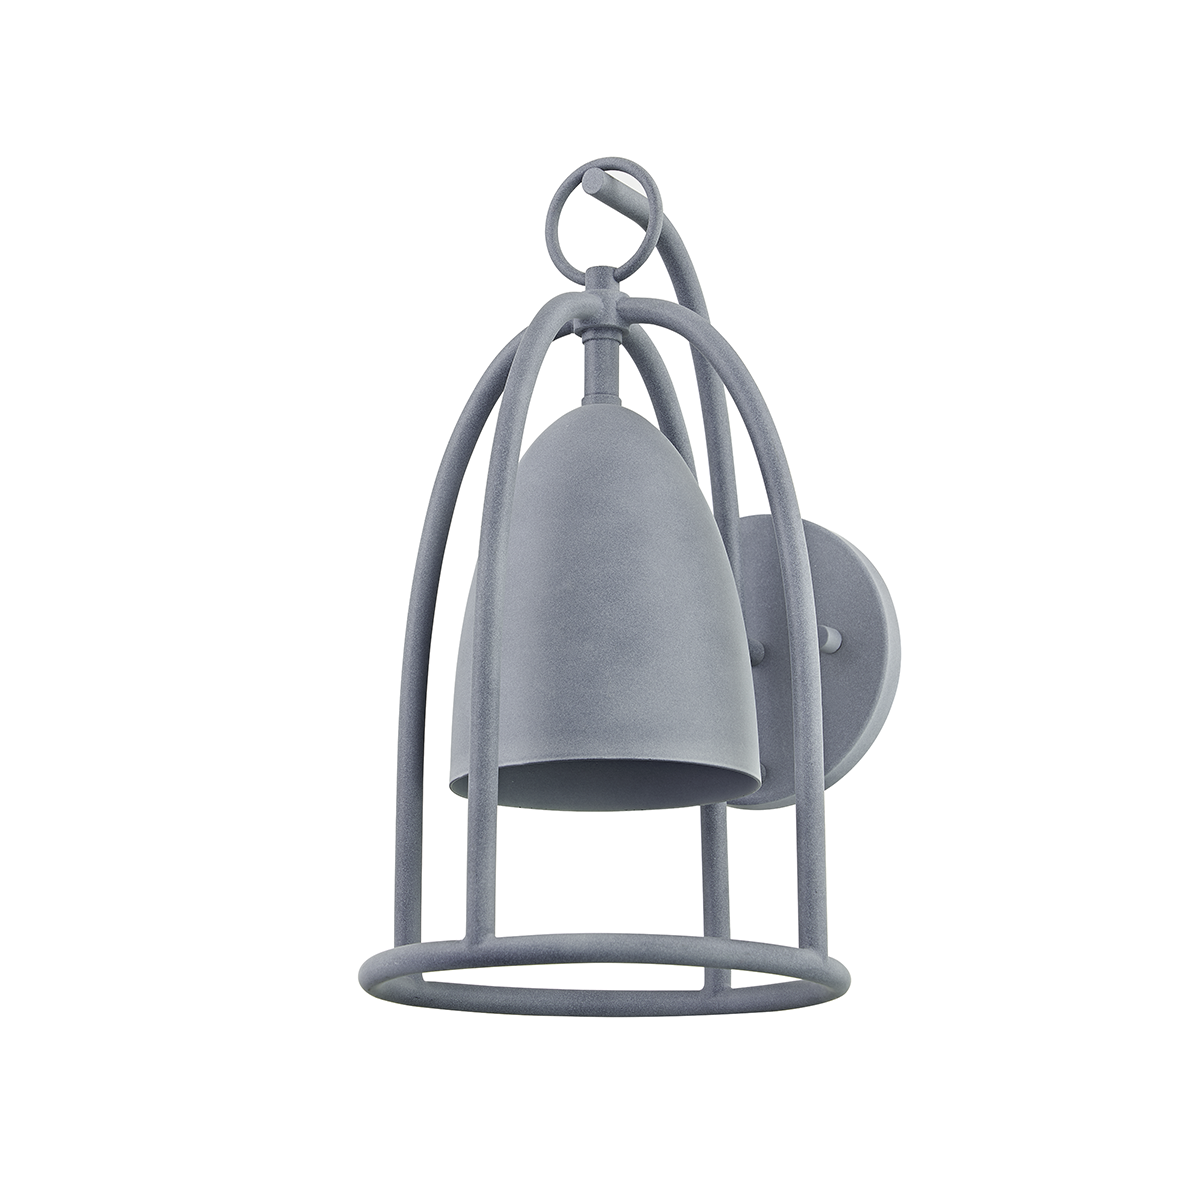 Troy Lighting 1 LIGHT EXTERIOR WALL SCONCE B1101 Outdoor l Wall Troy Lighting WEATHERED ZINC  